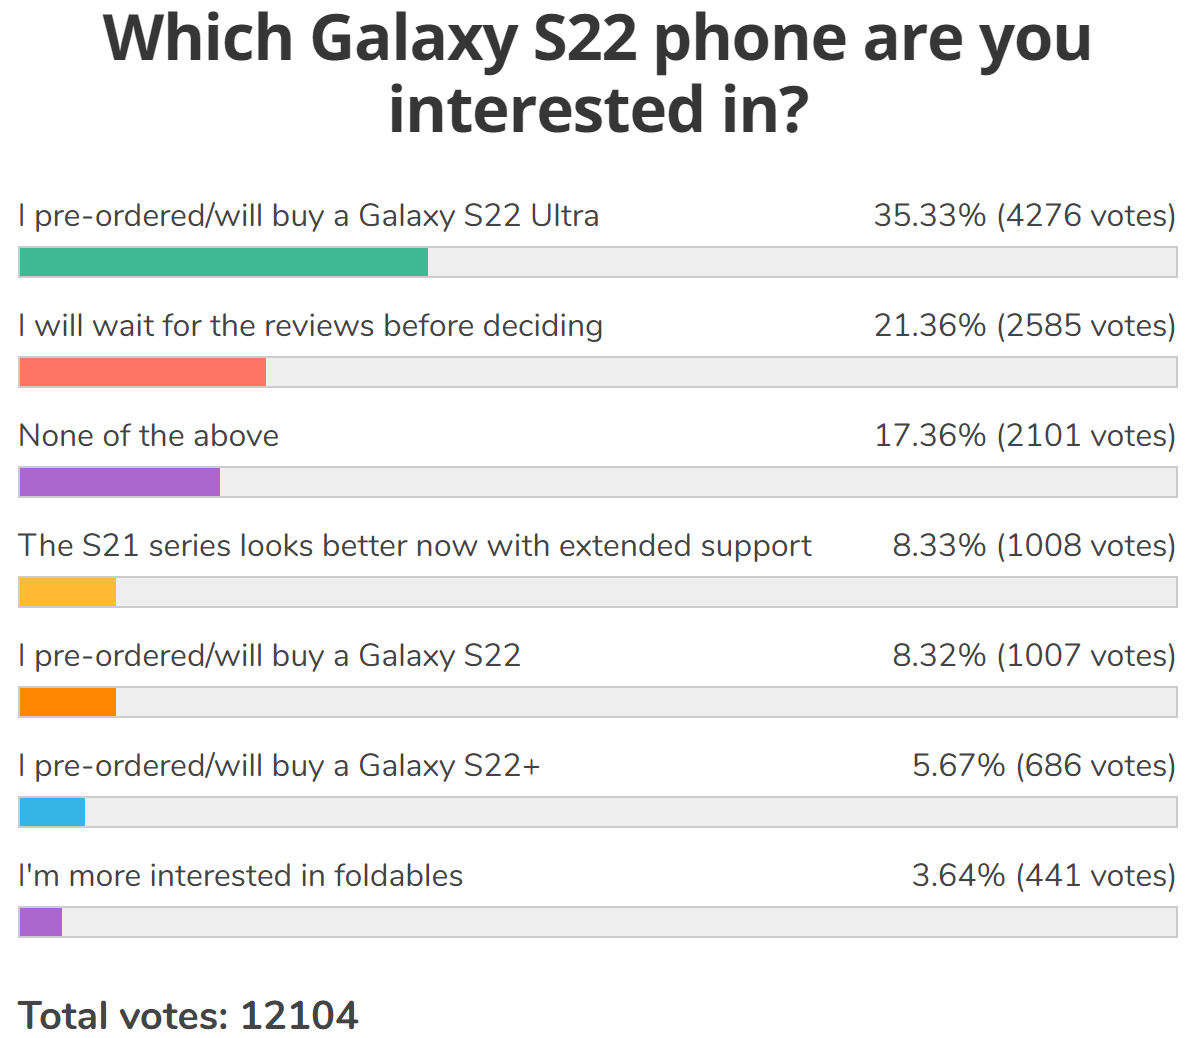 Weekly poll results: strong demand for the Galaxy S22 Ultra, the other two are in its shadow